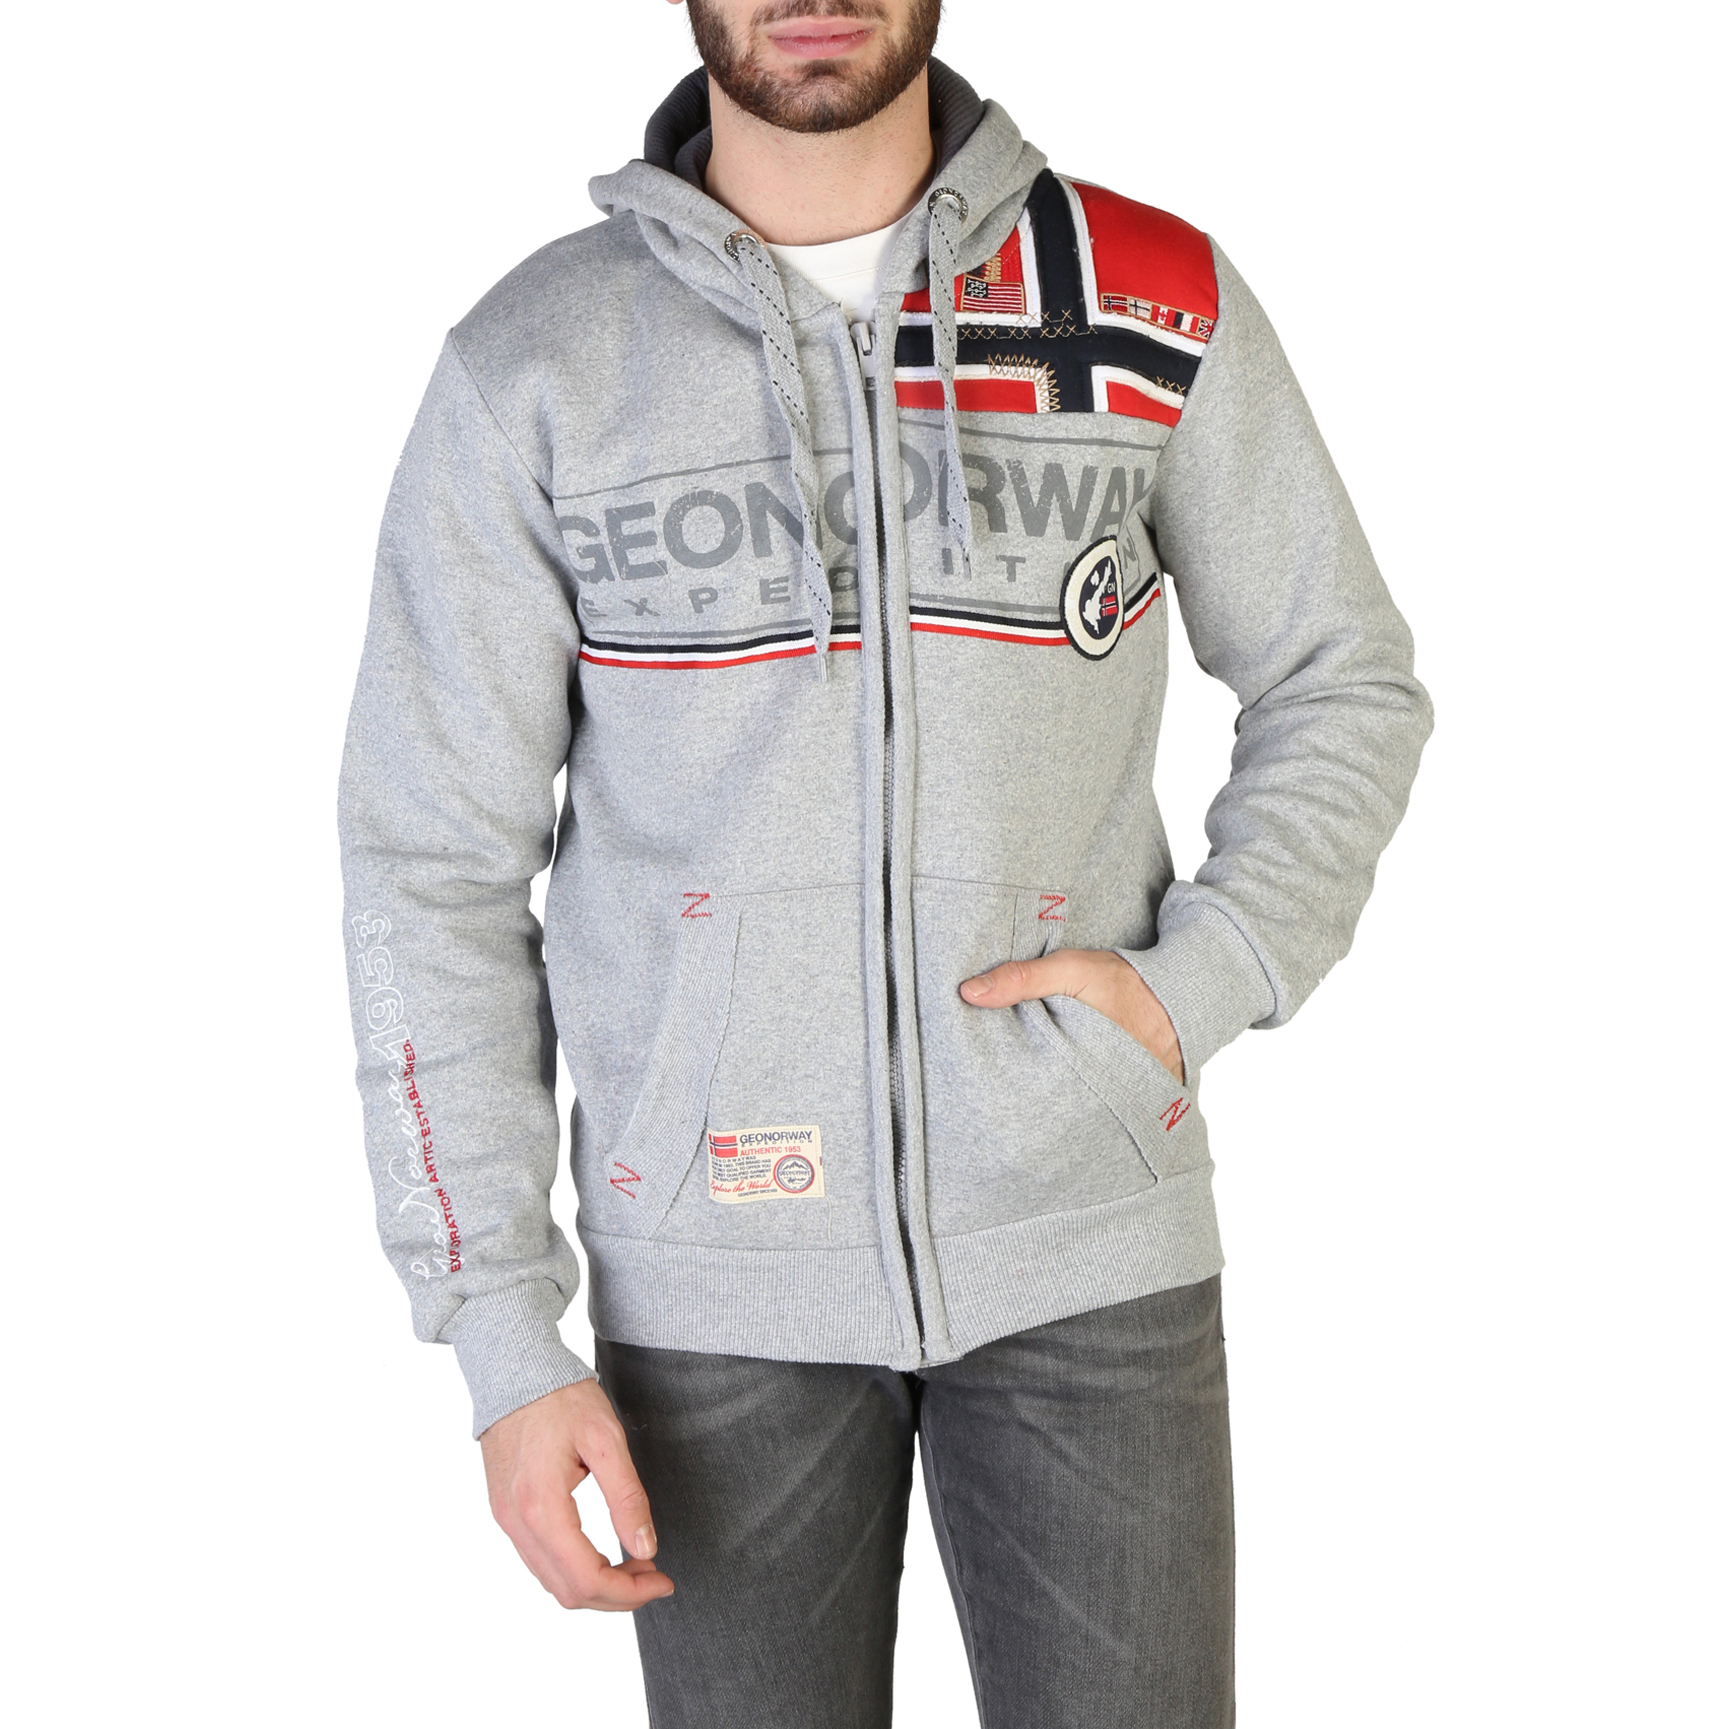 Geographical Norway Flipper man